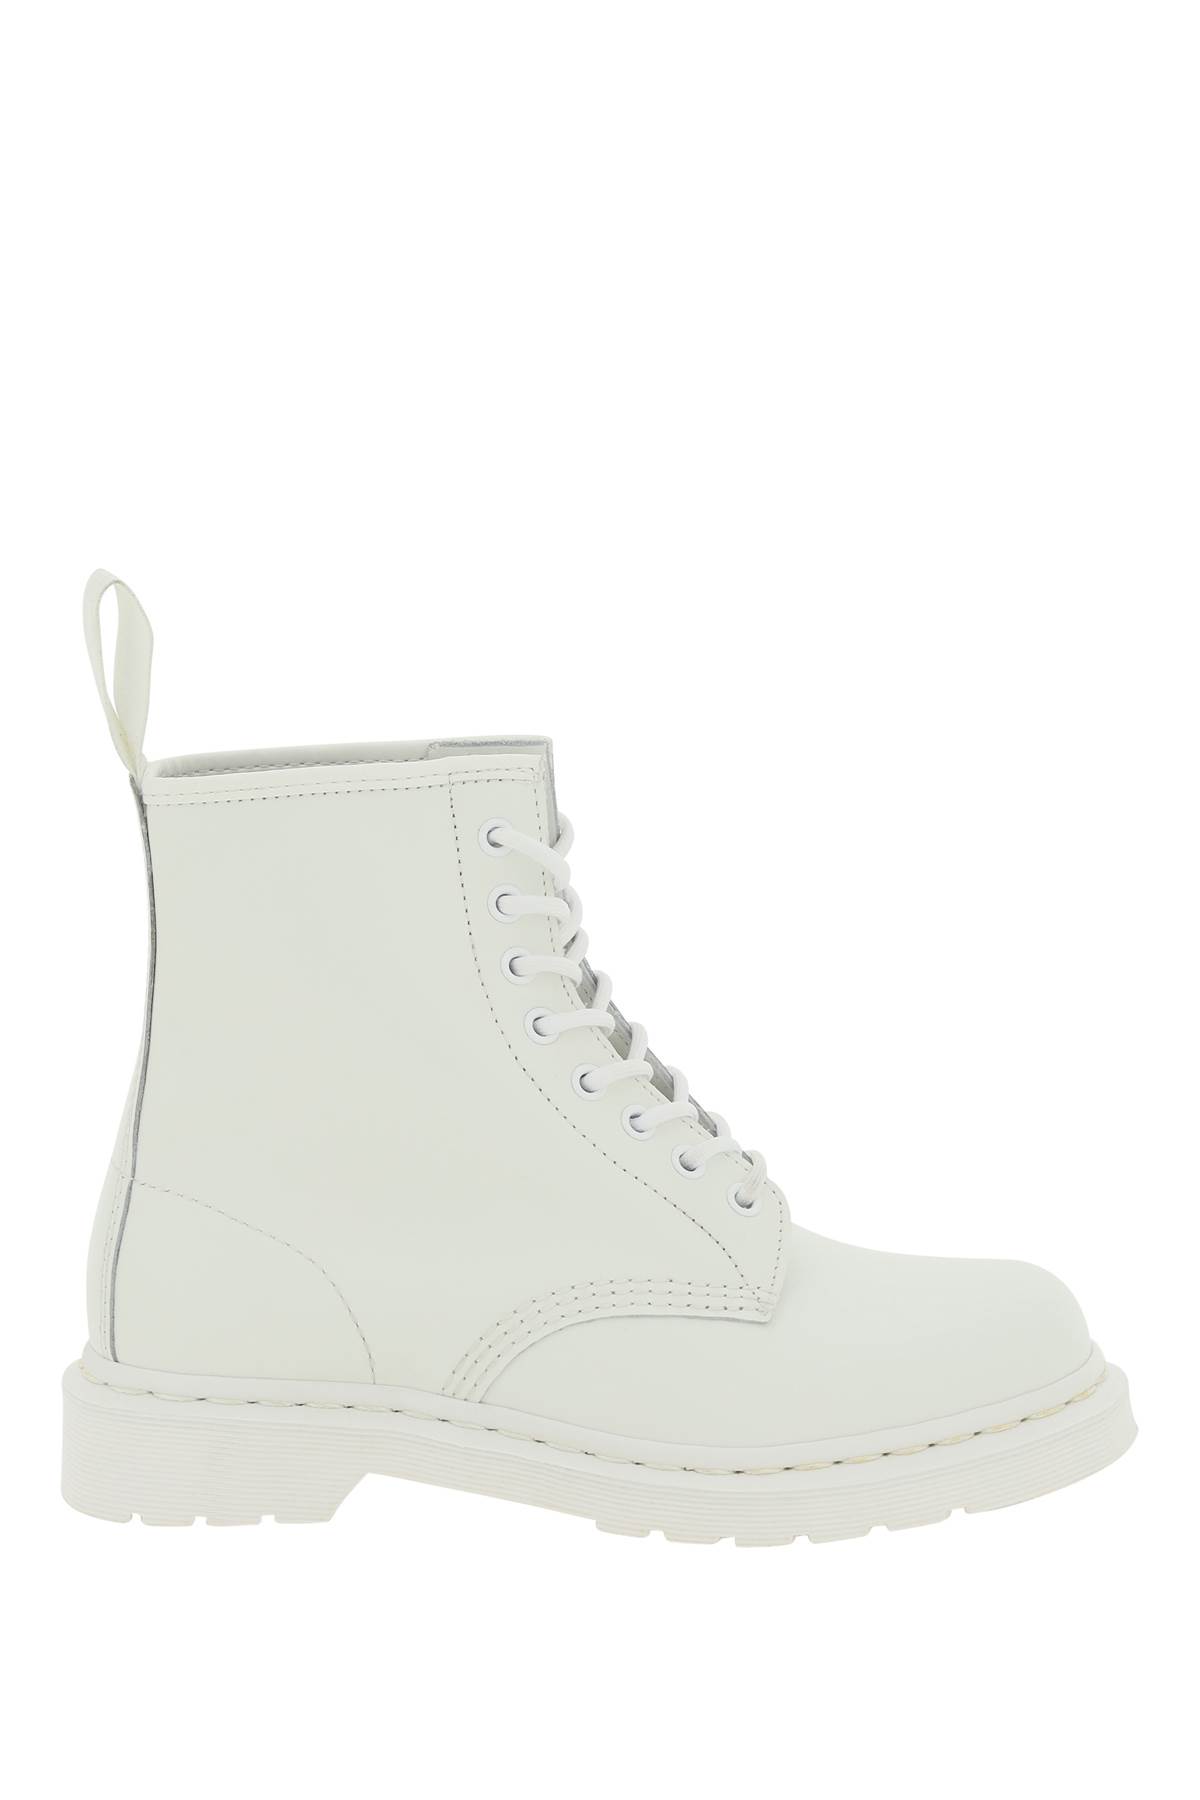 Dr. Martens 1460 Mono Smooth Lace-up Combat Boots